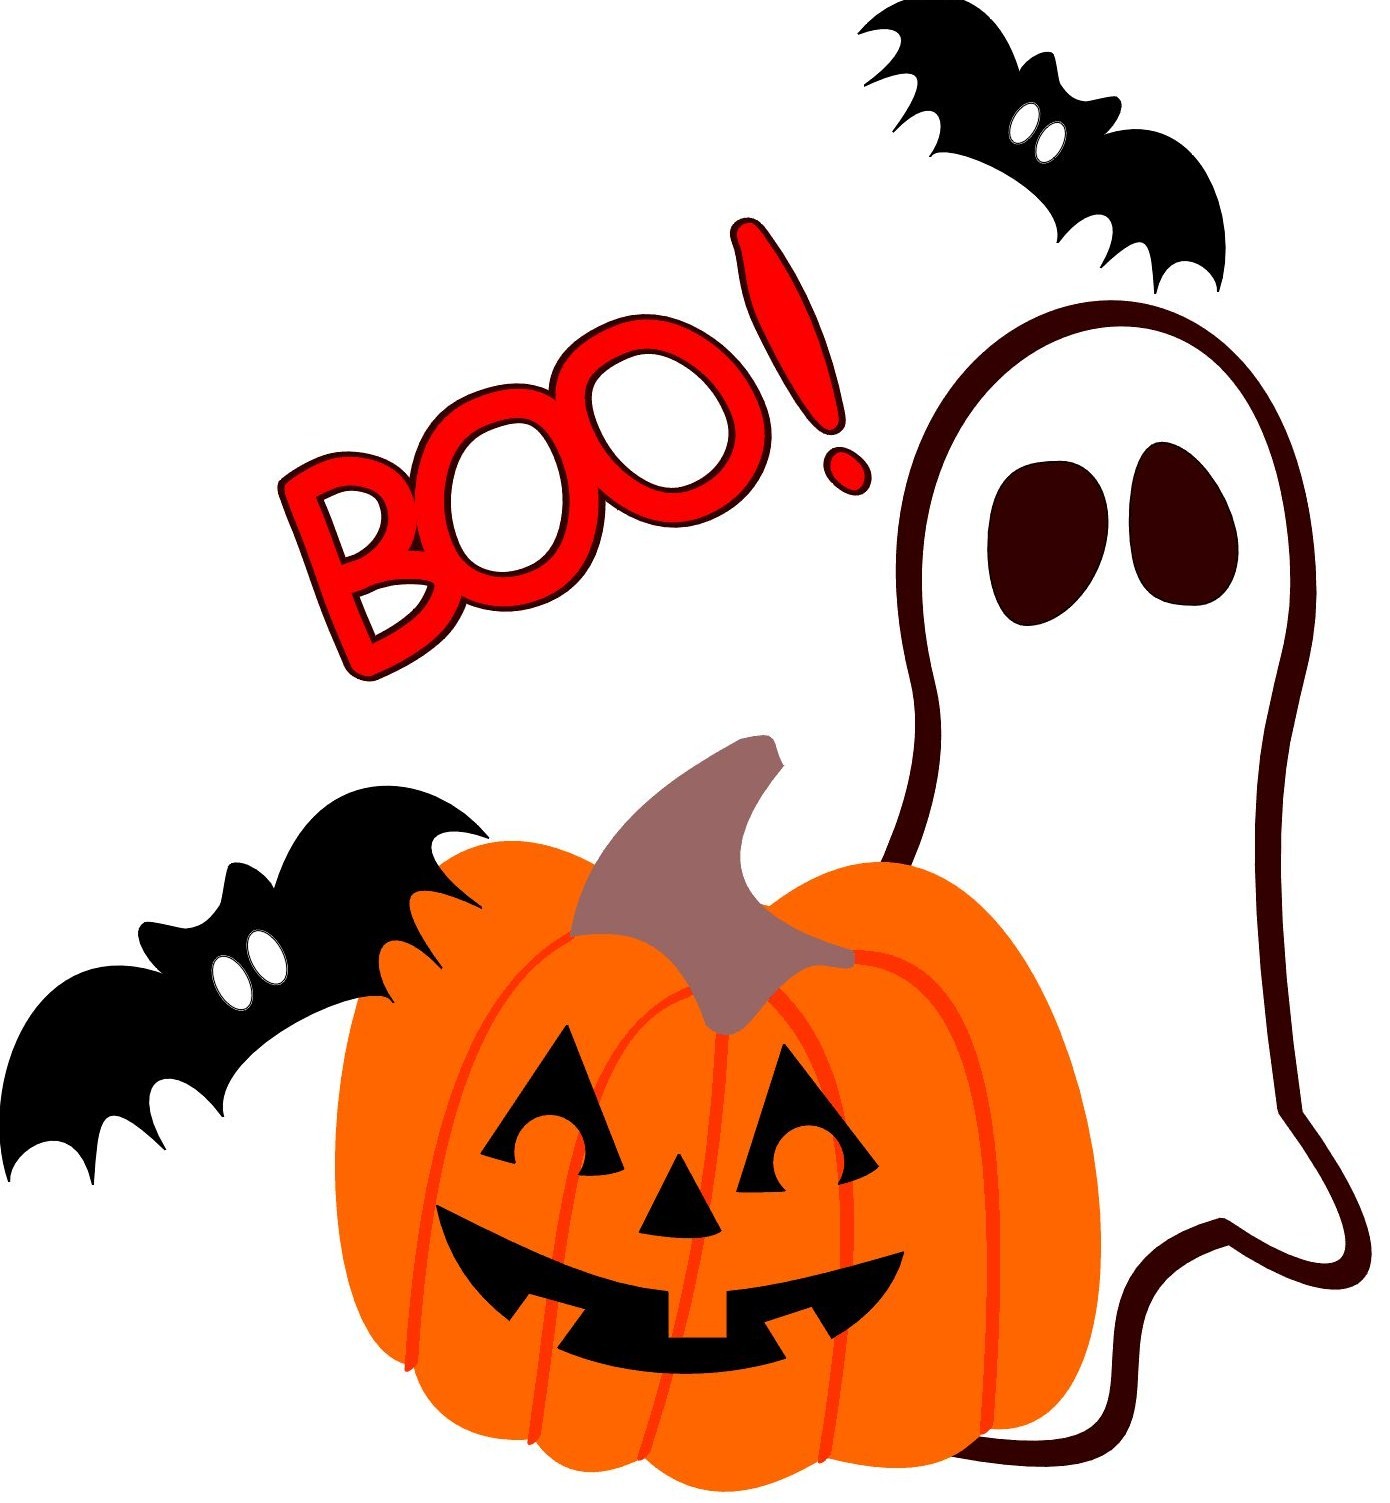 Halloween Pumpkin Clipart | Clipart library - Free Clipart Images